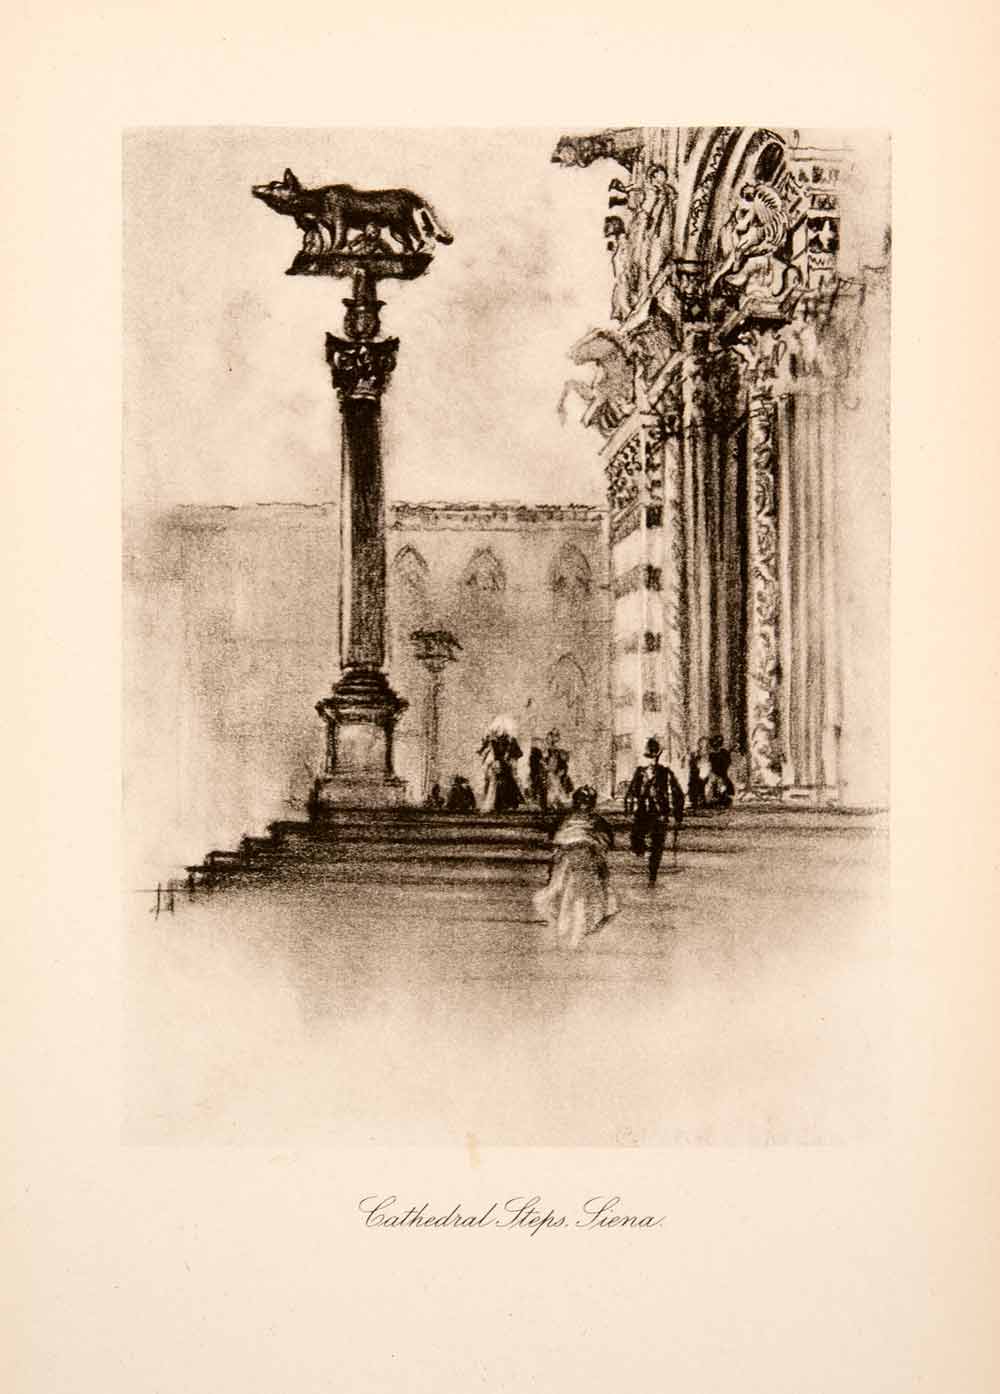 1904 Photogravure Siena Cathedral Steps Church Duomo Italy Joseph Pennell XGWA4